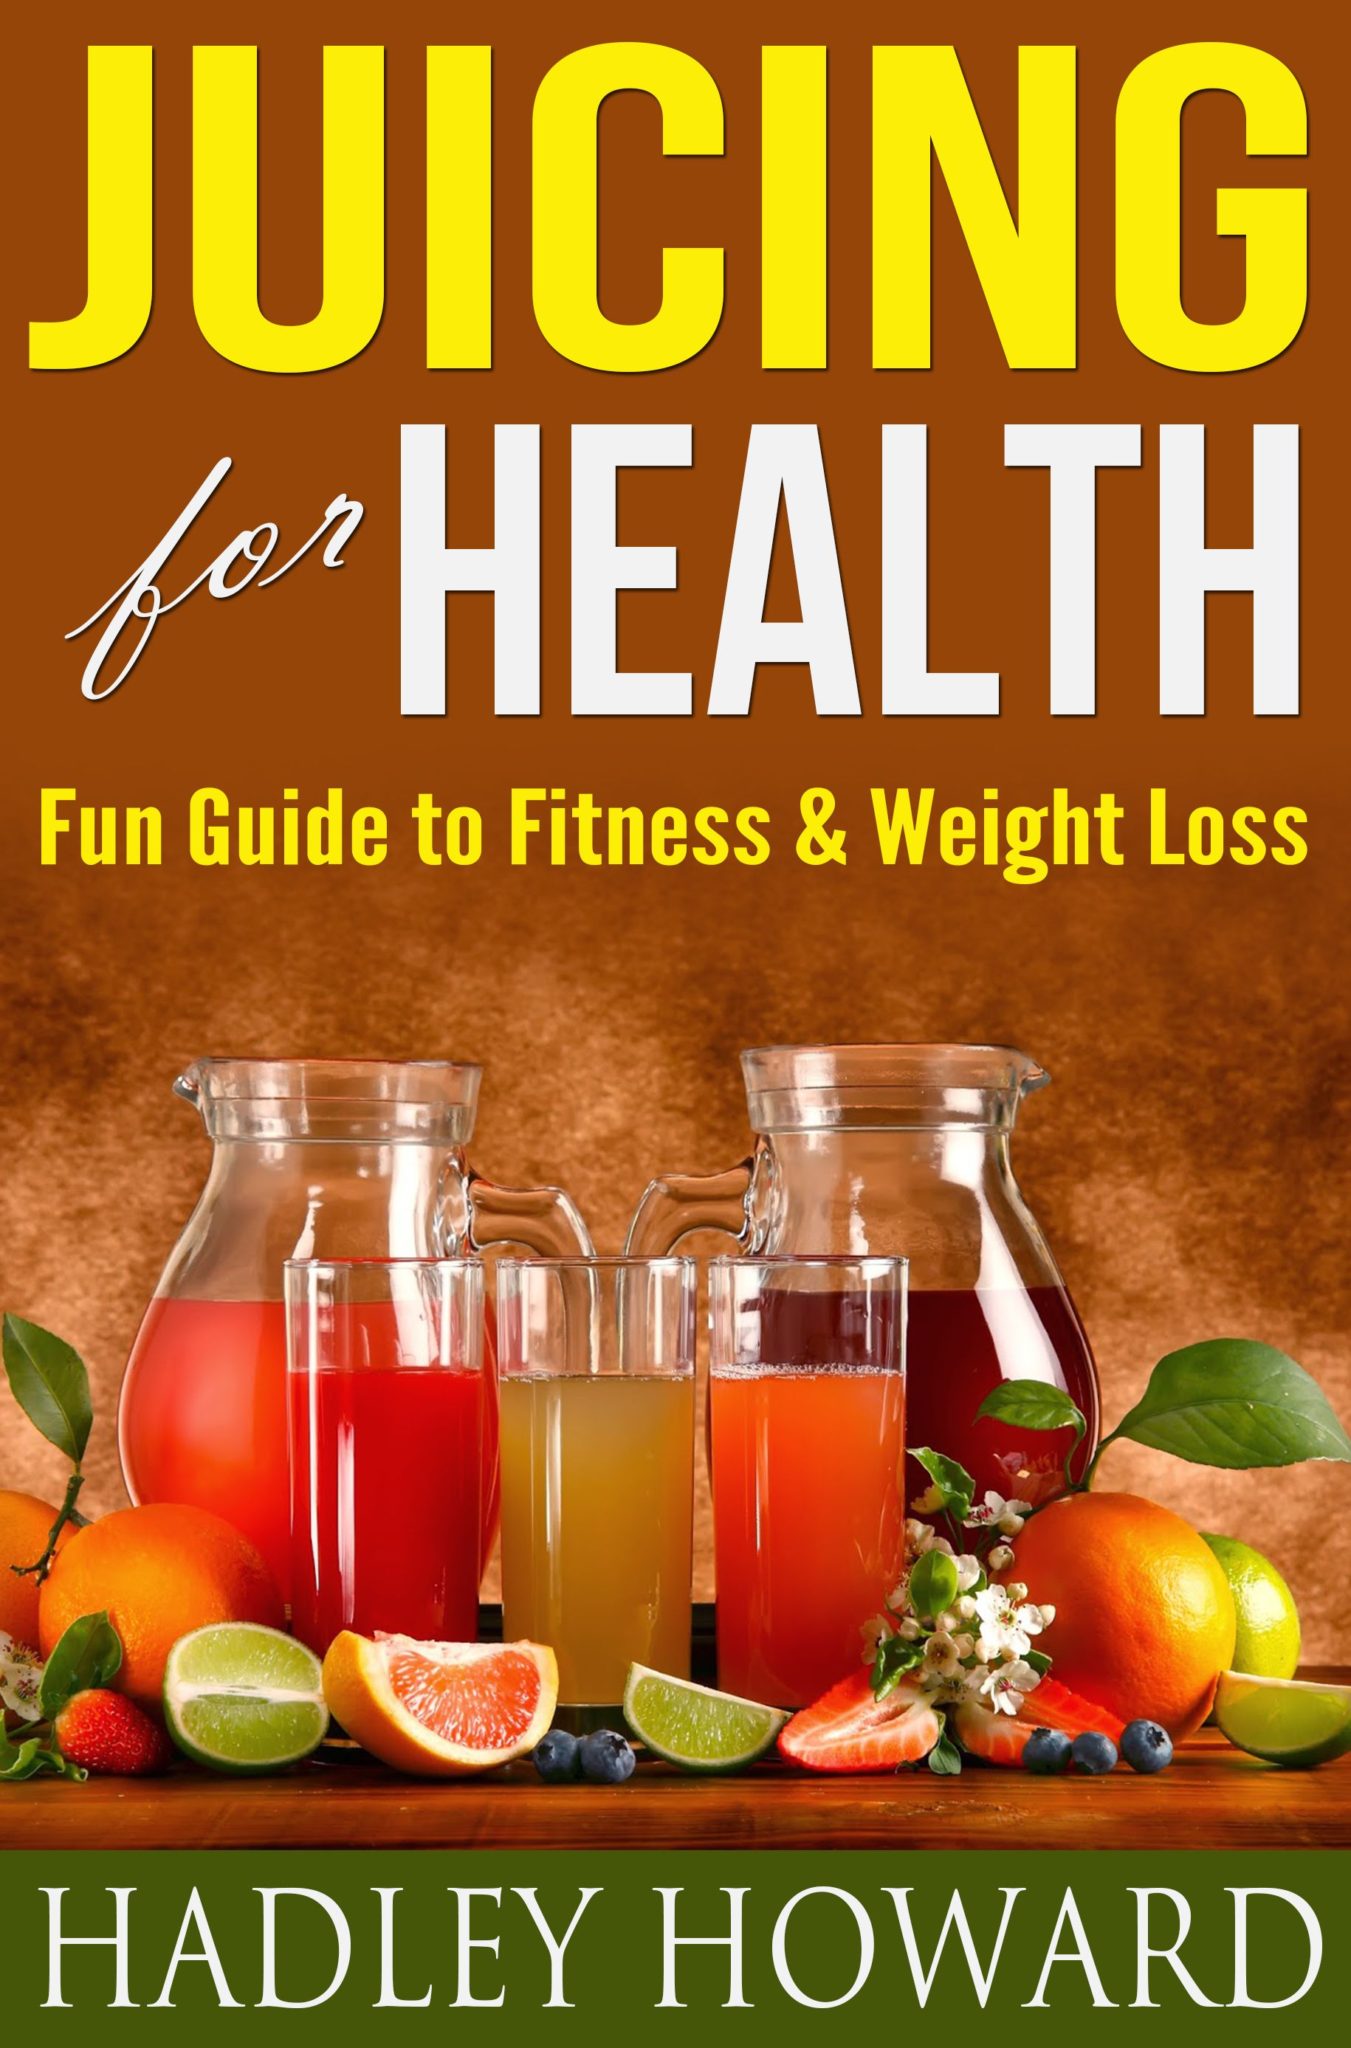 Juicing for Health- Fun Guide to Fitness & Weight Loss by Hadley Howard